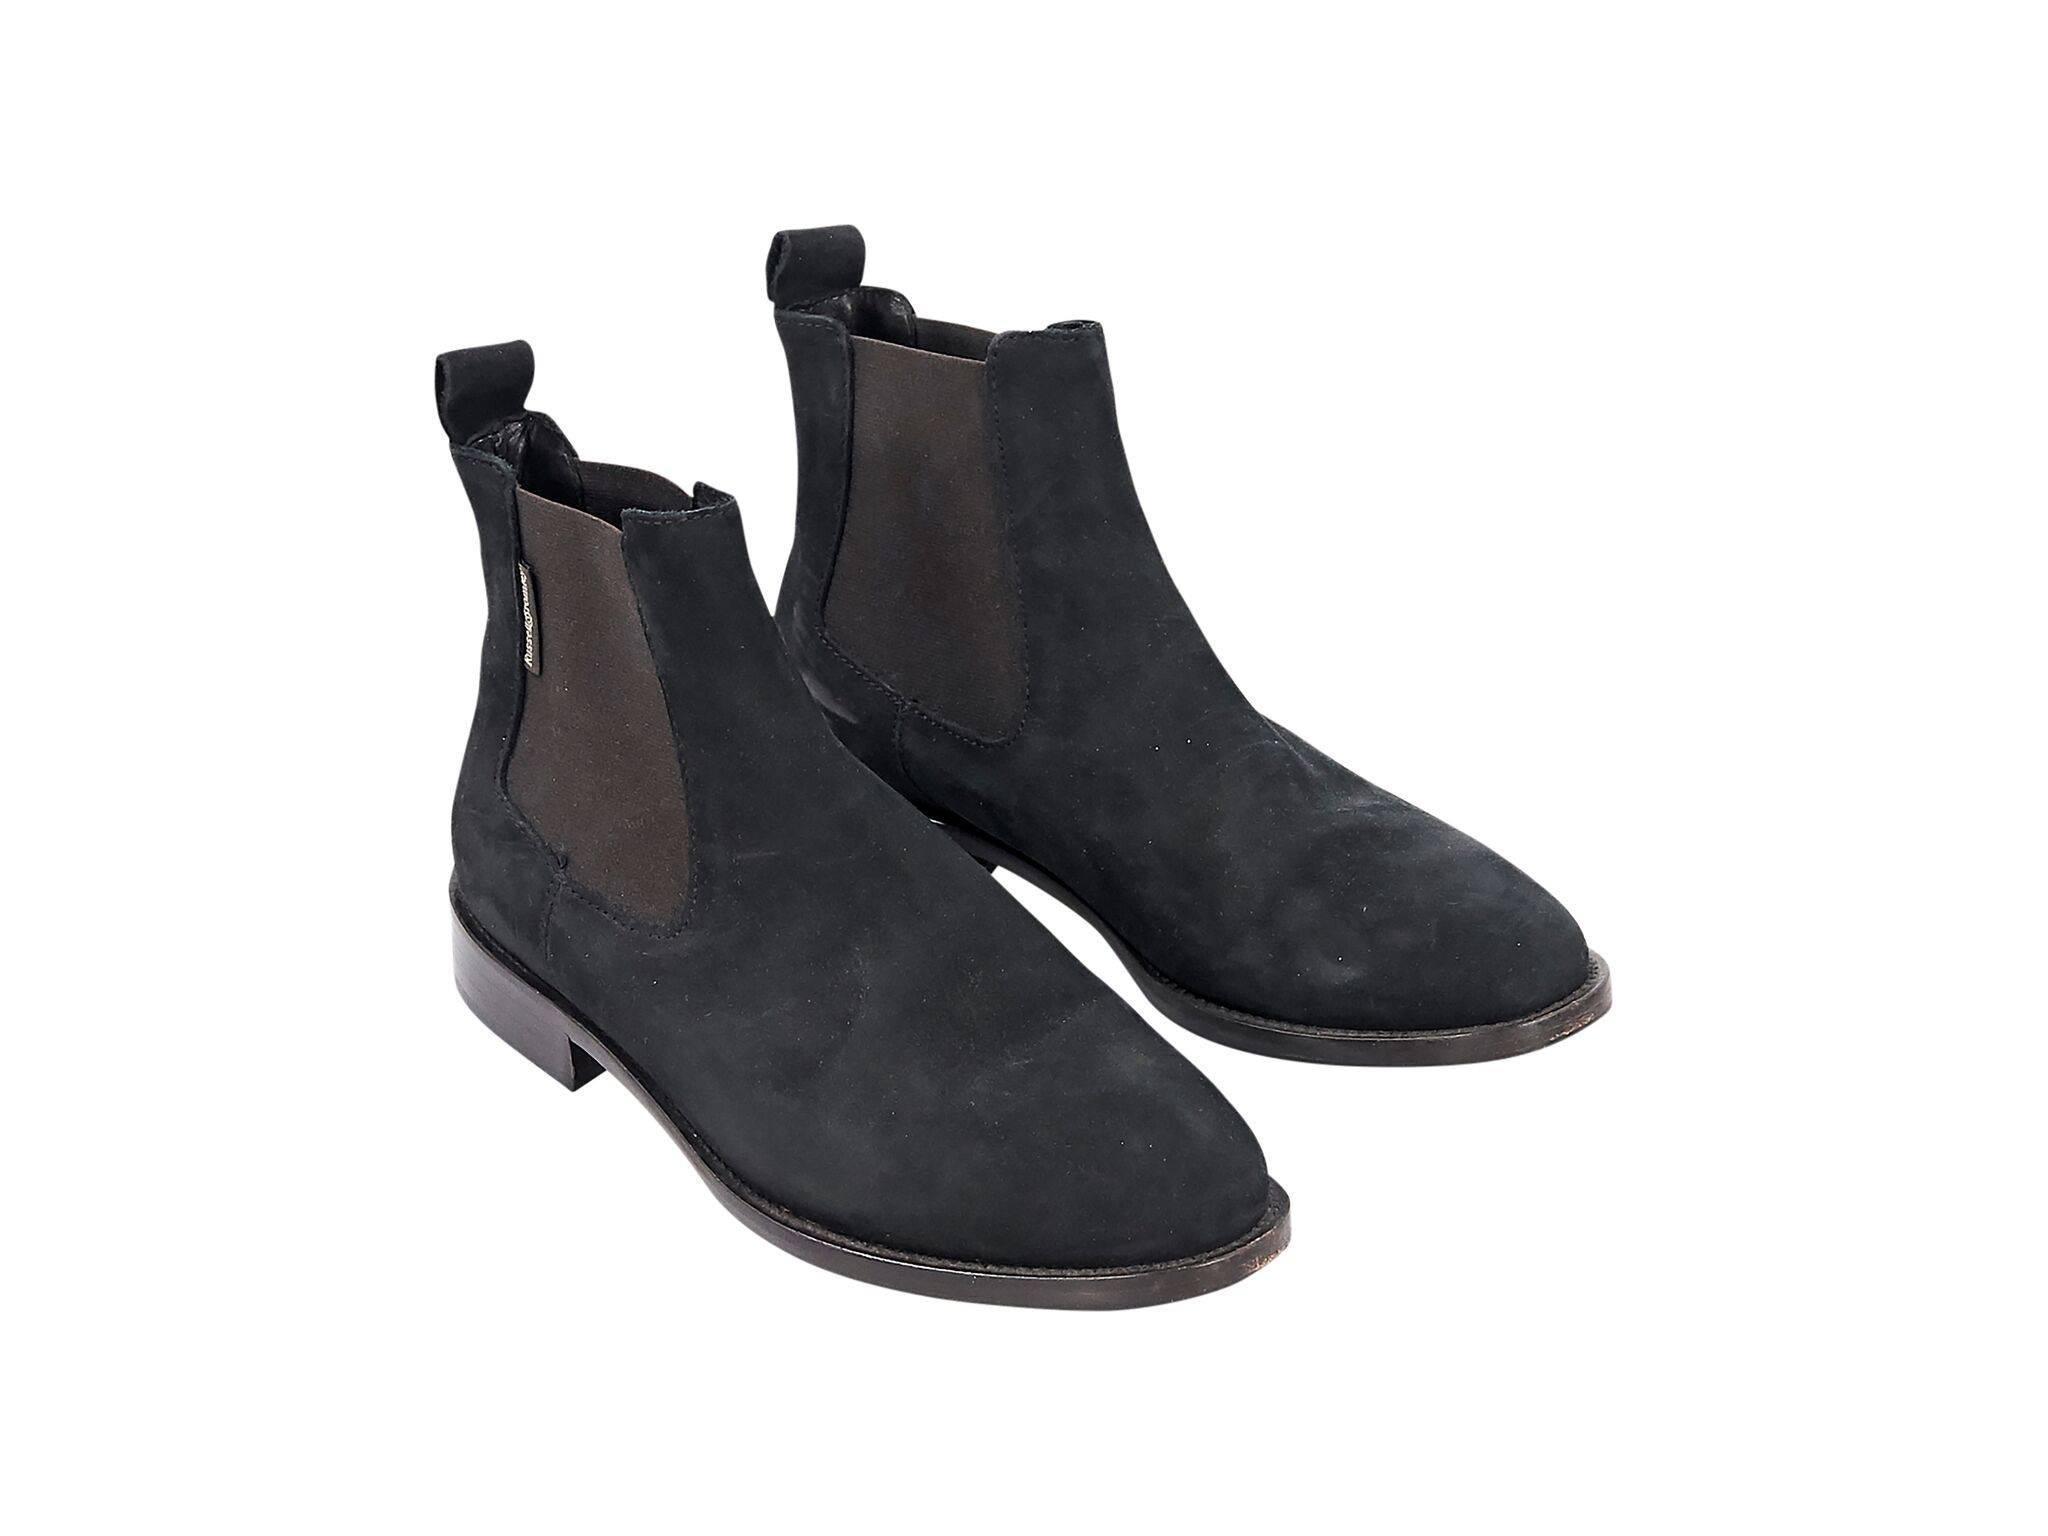 Product details:  Black suede Chelsea boots by Russell & Bromley.  Elasticized sides for easy fit.  Round toe.  Low stacked heel.  Pull-on style. 
Condition: Pre-owned. Very good.
Est. Retail $295